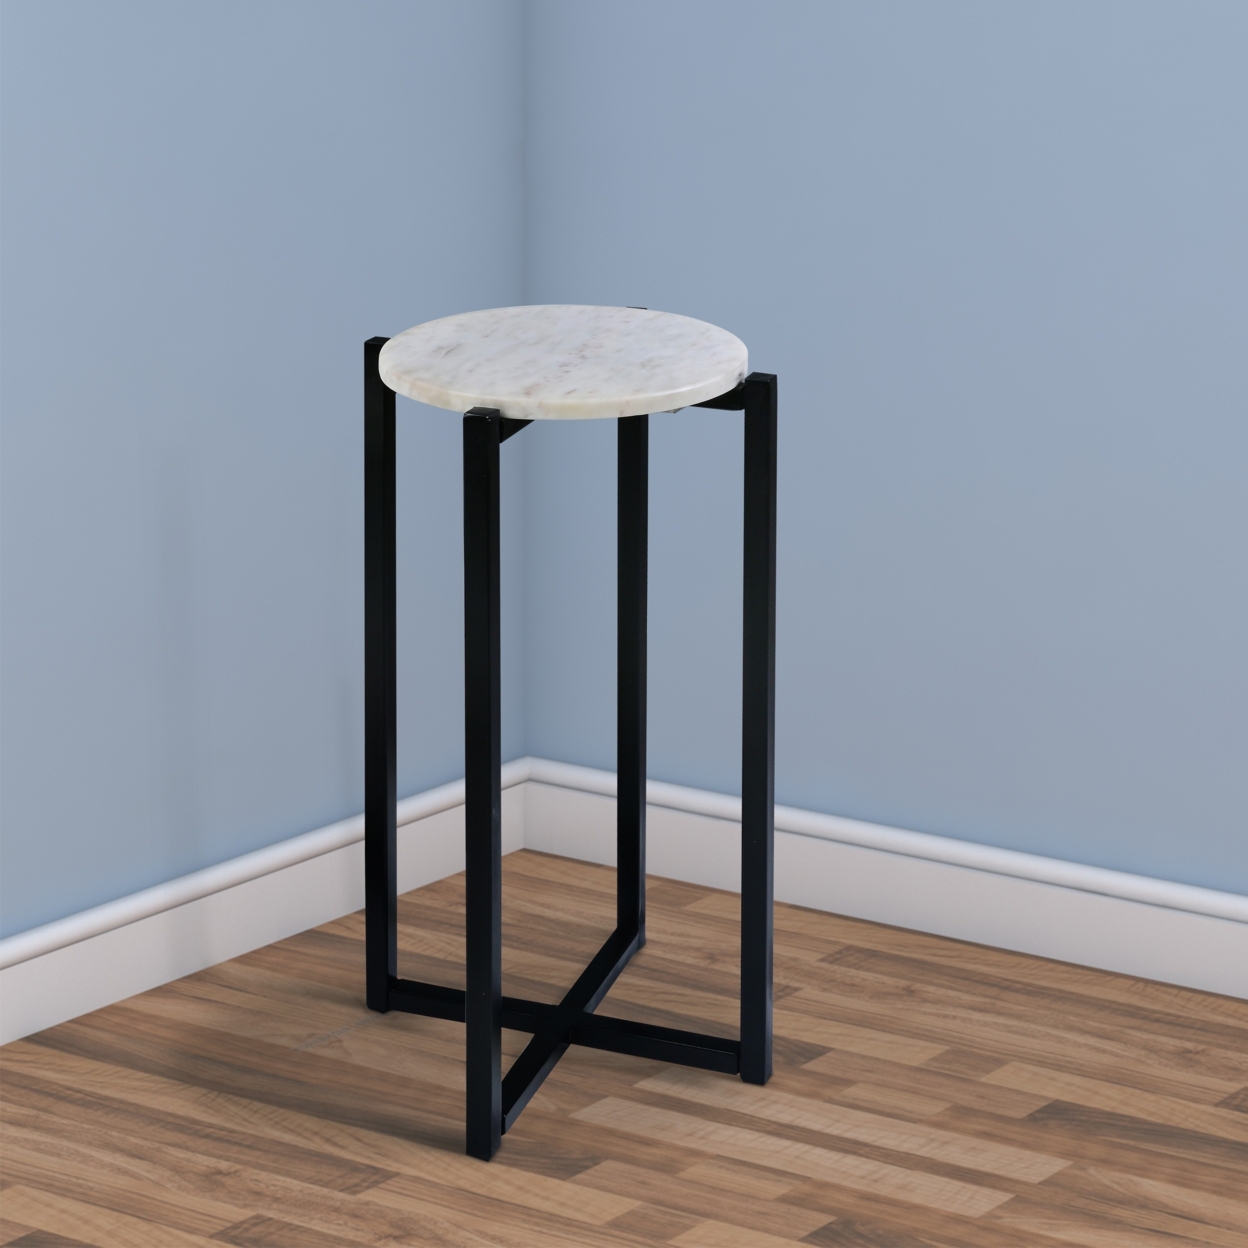 Ivy 24.5 Inch Marble Top Accent Round Side Table With Metal Frame, White And Black- Saltoro Sherpi